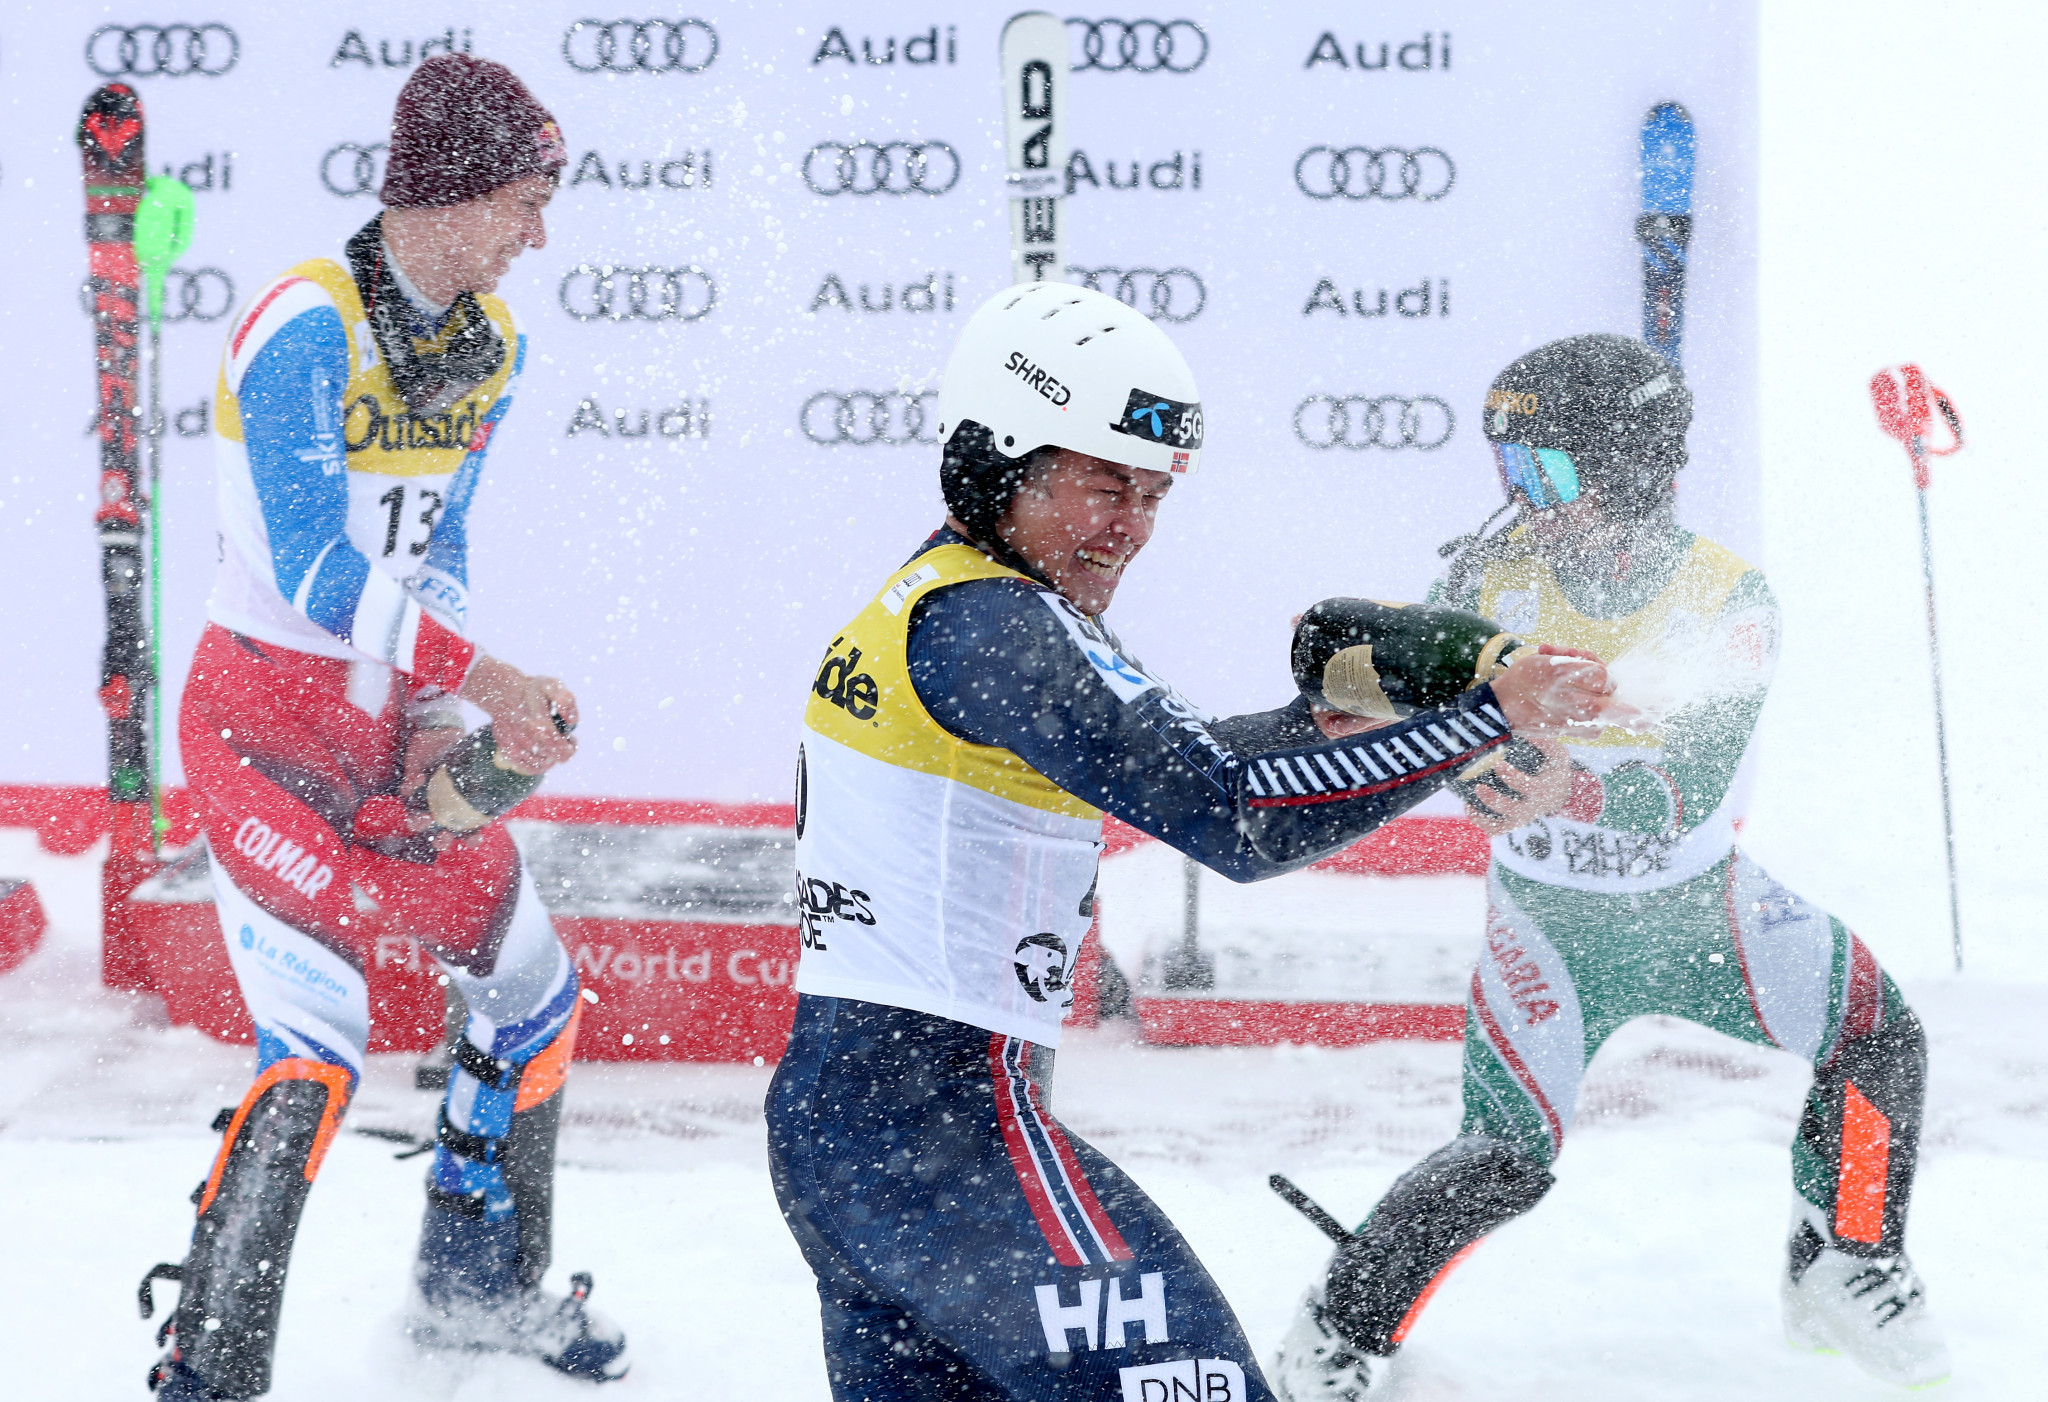 Steen Olsen claims dramatic slalom Alpine Skiing World Cup victory in Palisades Tahoe after Ginnis disqualified